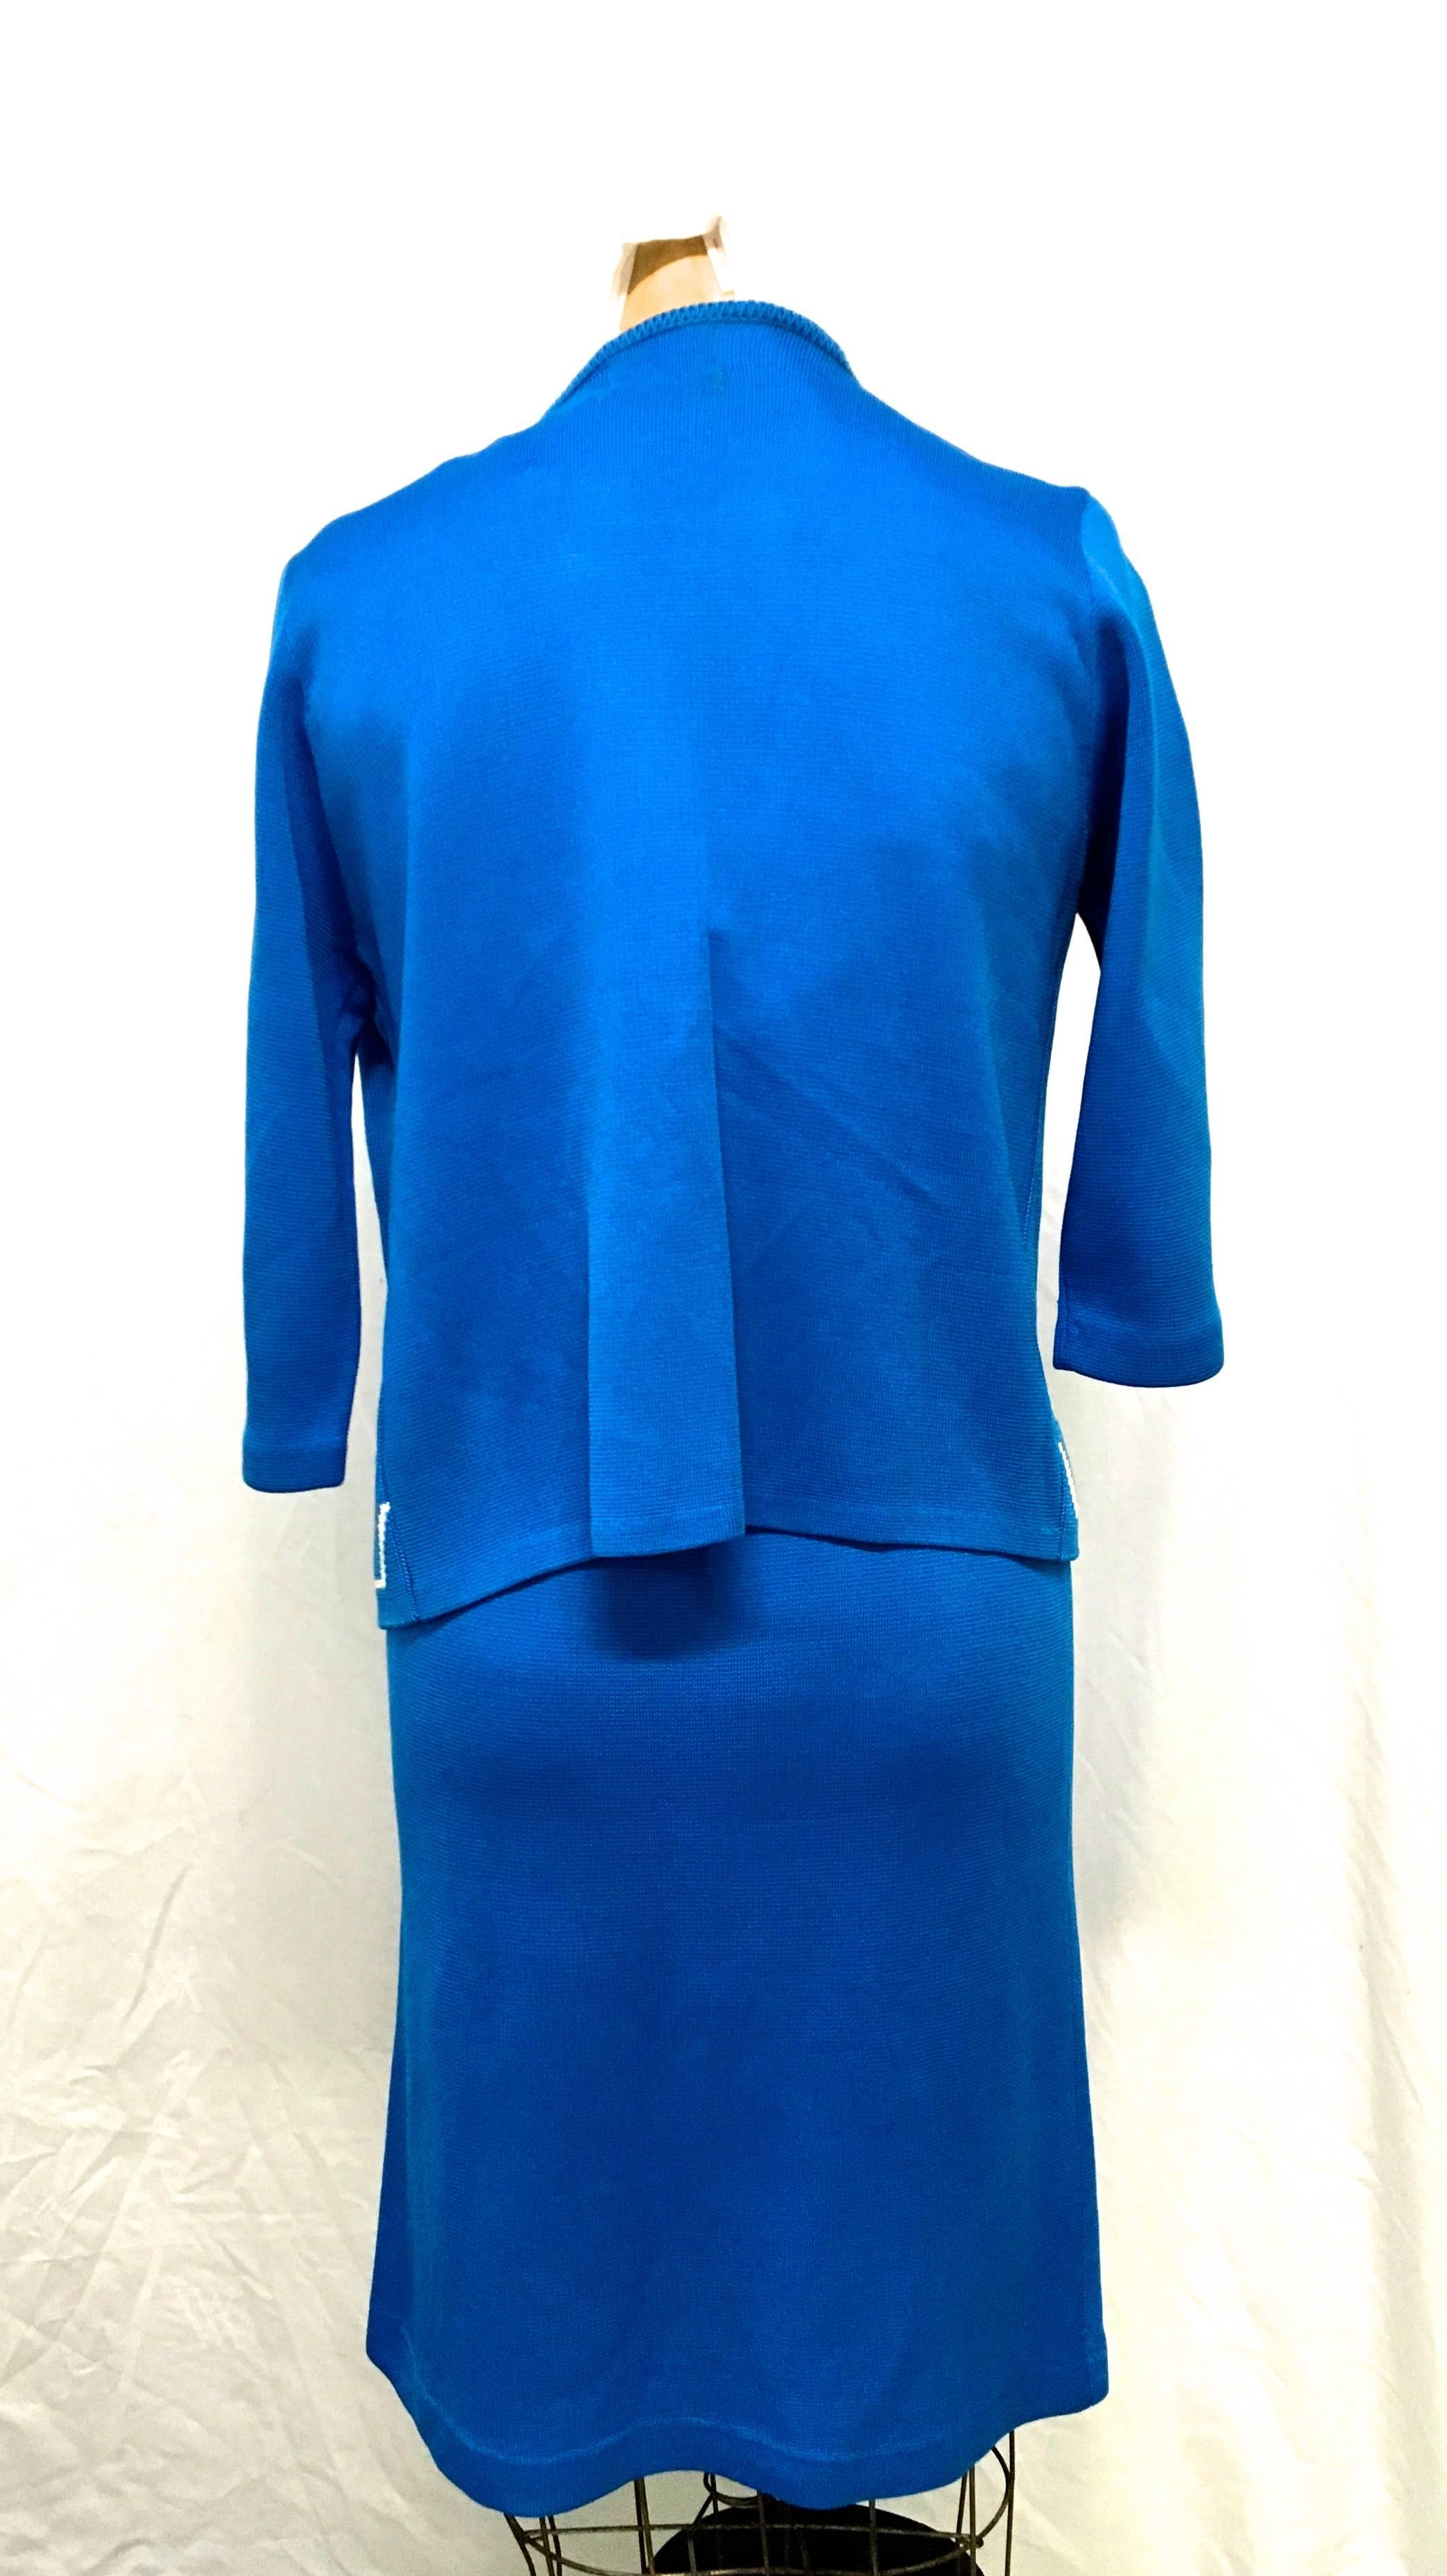 Presented here we have from the 1960's a beautiful 2 pc. cobalt blue with white trim knit set. The skirt and the cardigan can be worn alone or together and look fantastic either way. There is no size listed on this, so there must be close attention